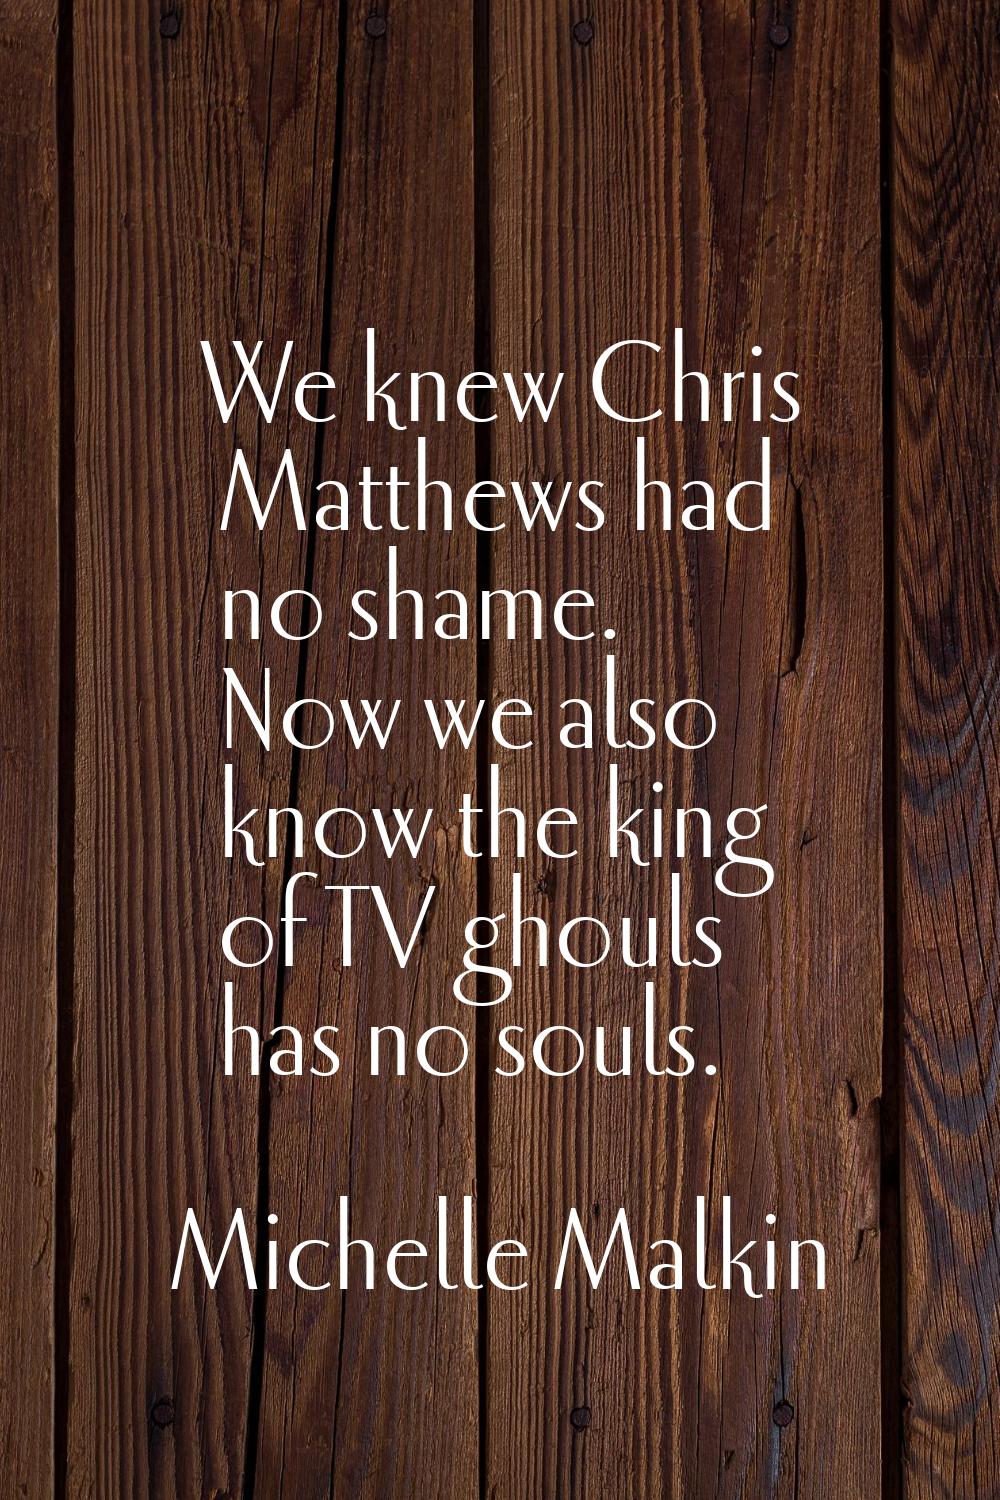 We knew Chris Matthews had no shame. Now we also know the king of TV ghouls has no souls.